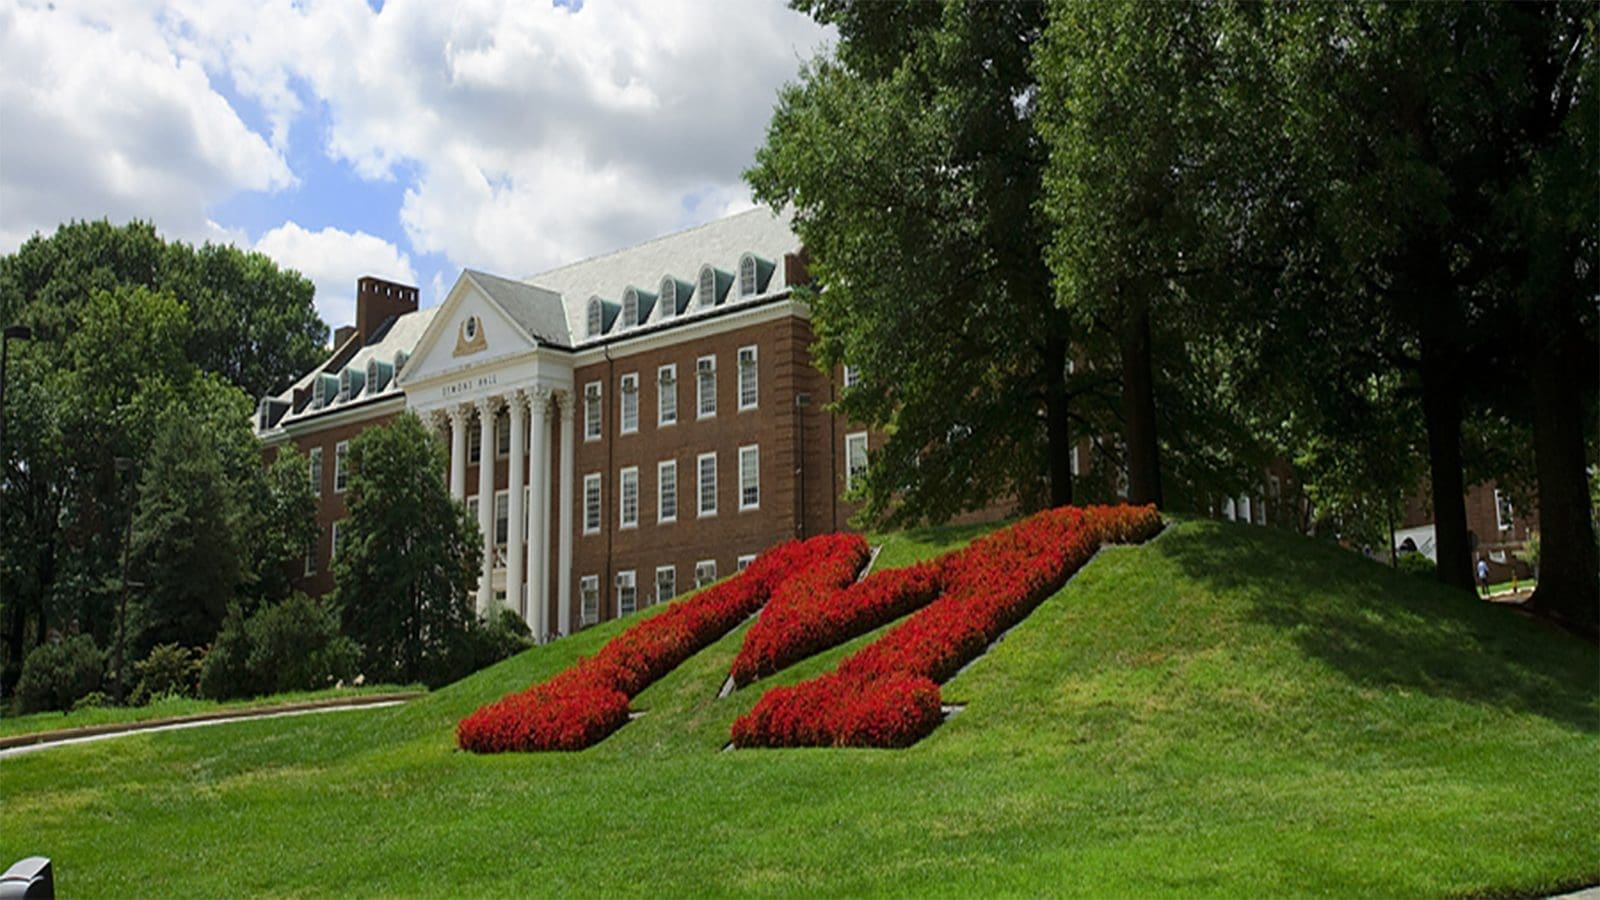 FDA funds expansion of University of Maryland’s Joint Institute for Food Safety and Applied Nutrition